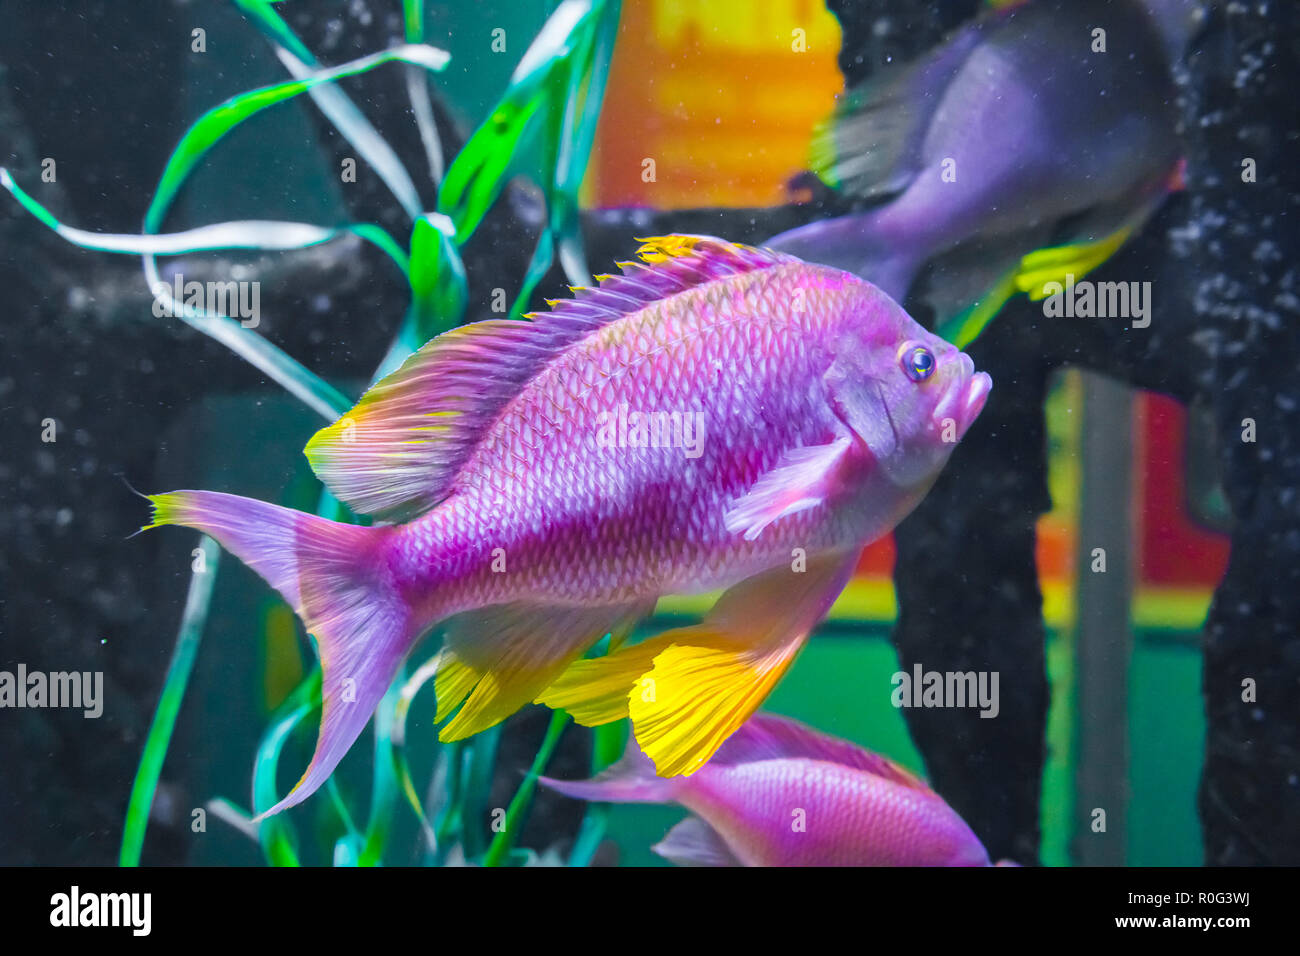 beautiful vibrant pink purple and yellow colored cichlid tropical fish underwater sea life animal portrait Stock Photo